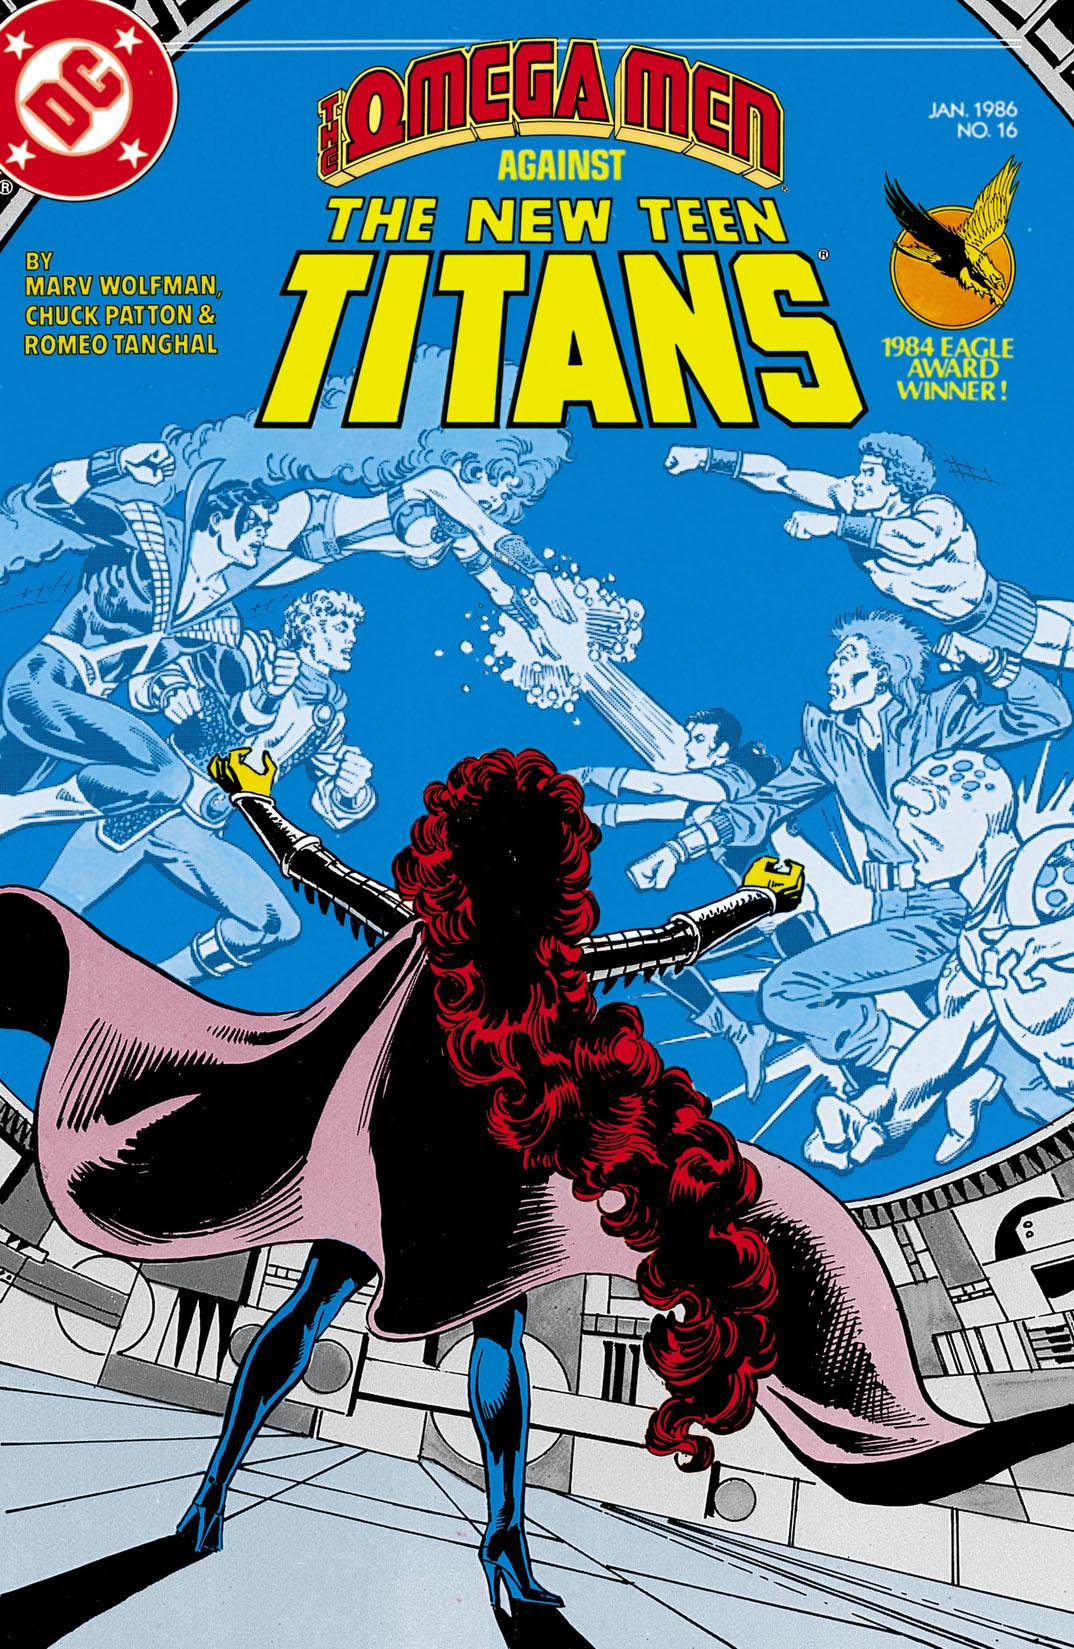 The New Teen Titans #16 preview images